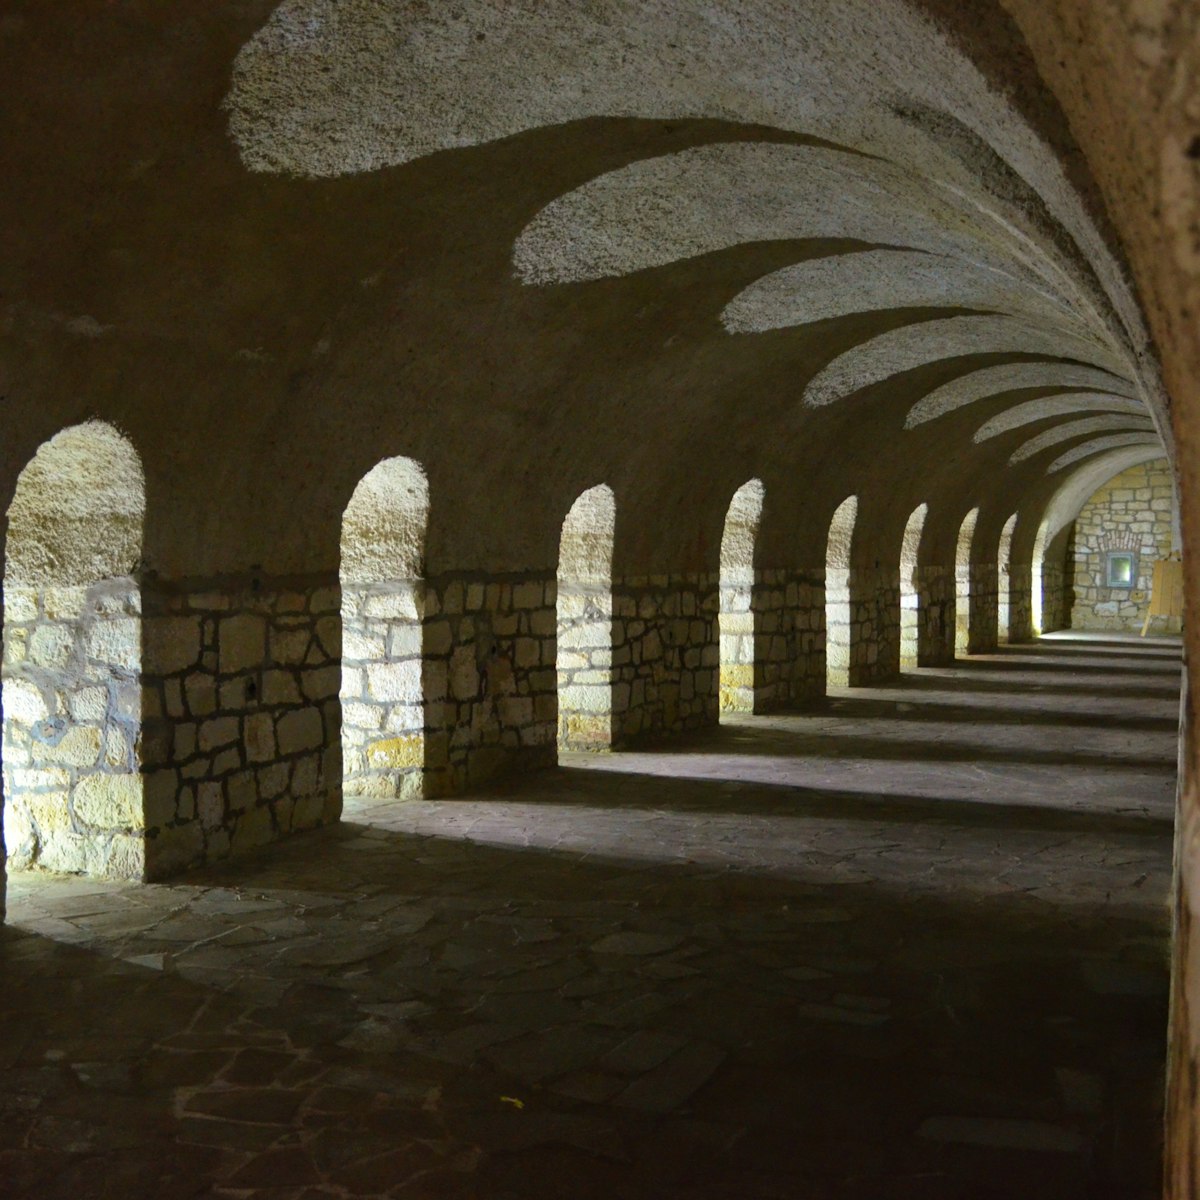 A hallway located in a fortress in K?odzko. Many windows with arches create beautiful shadows